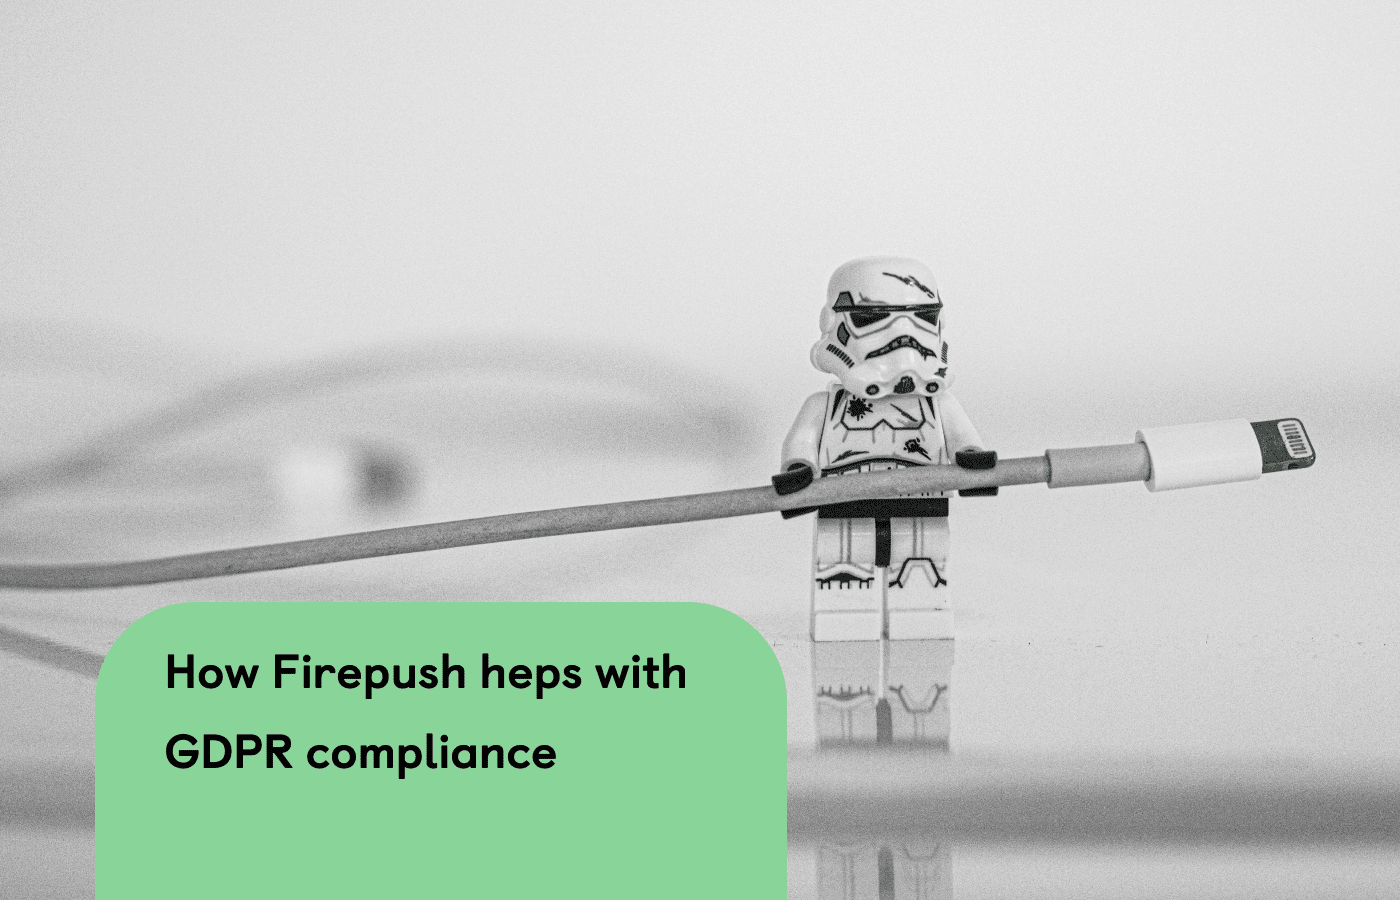 How Firepush helps with GDPR compliance